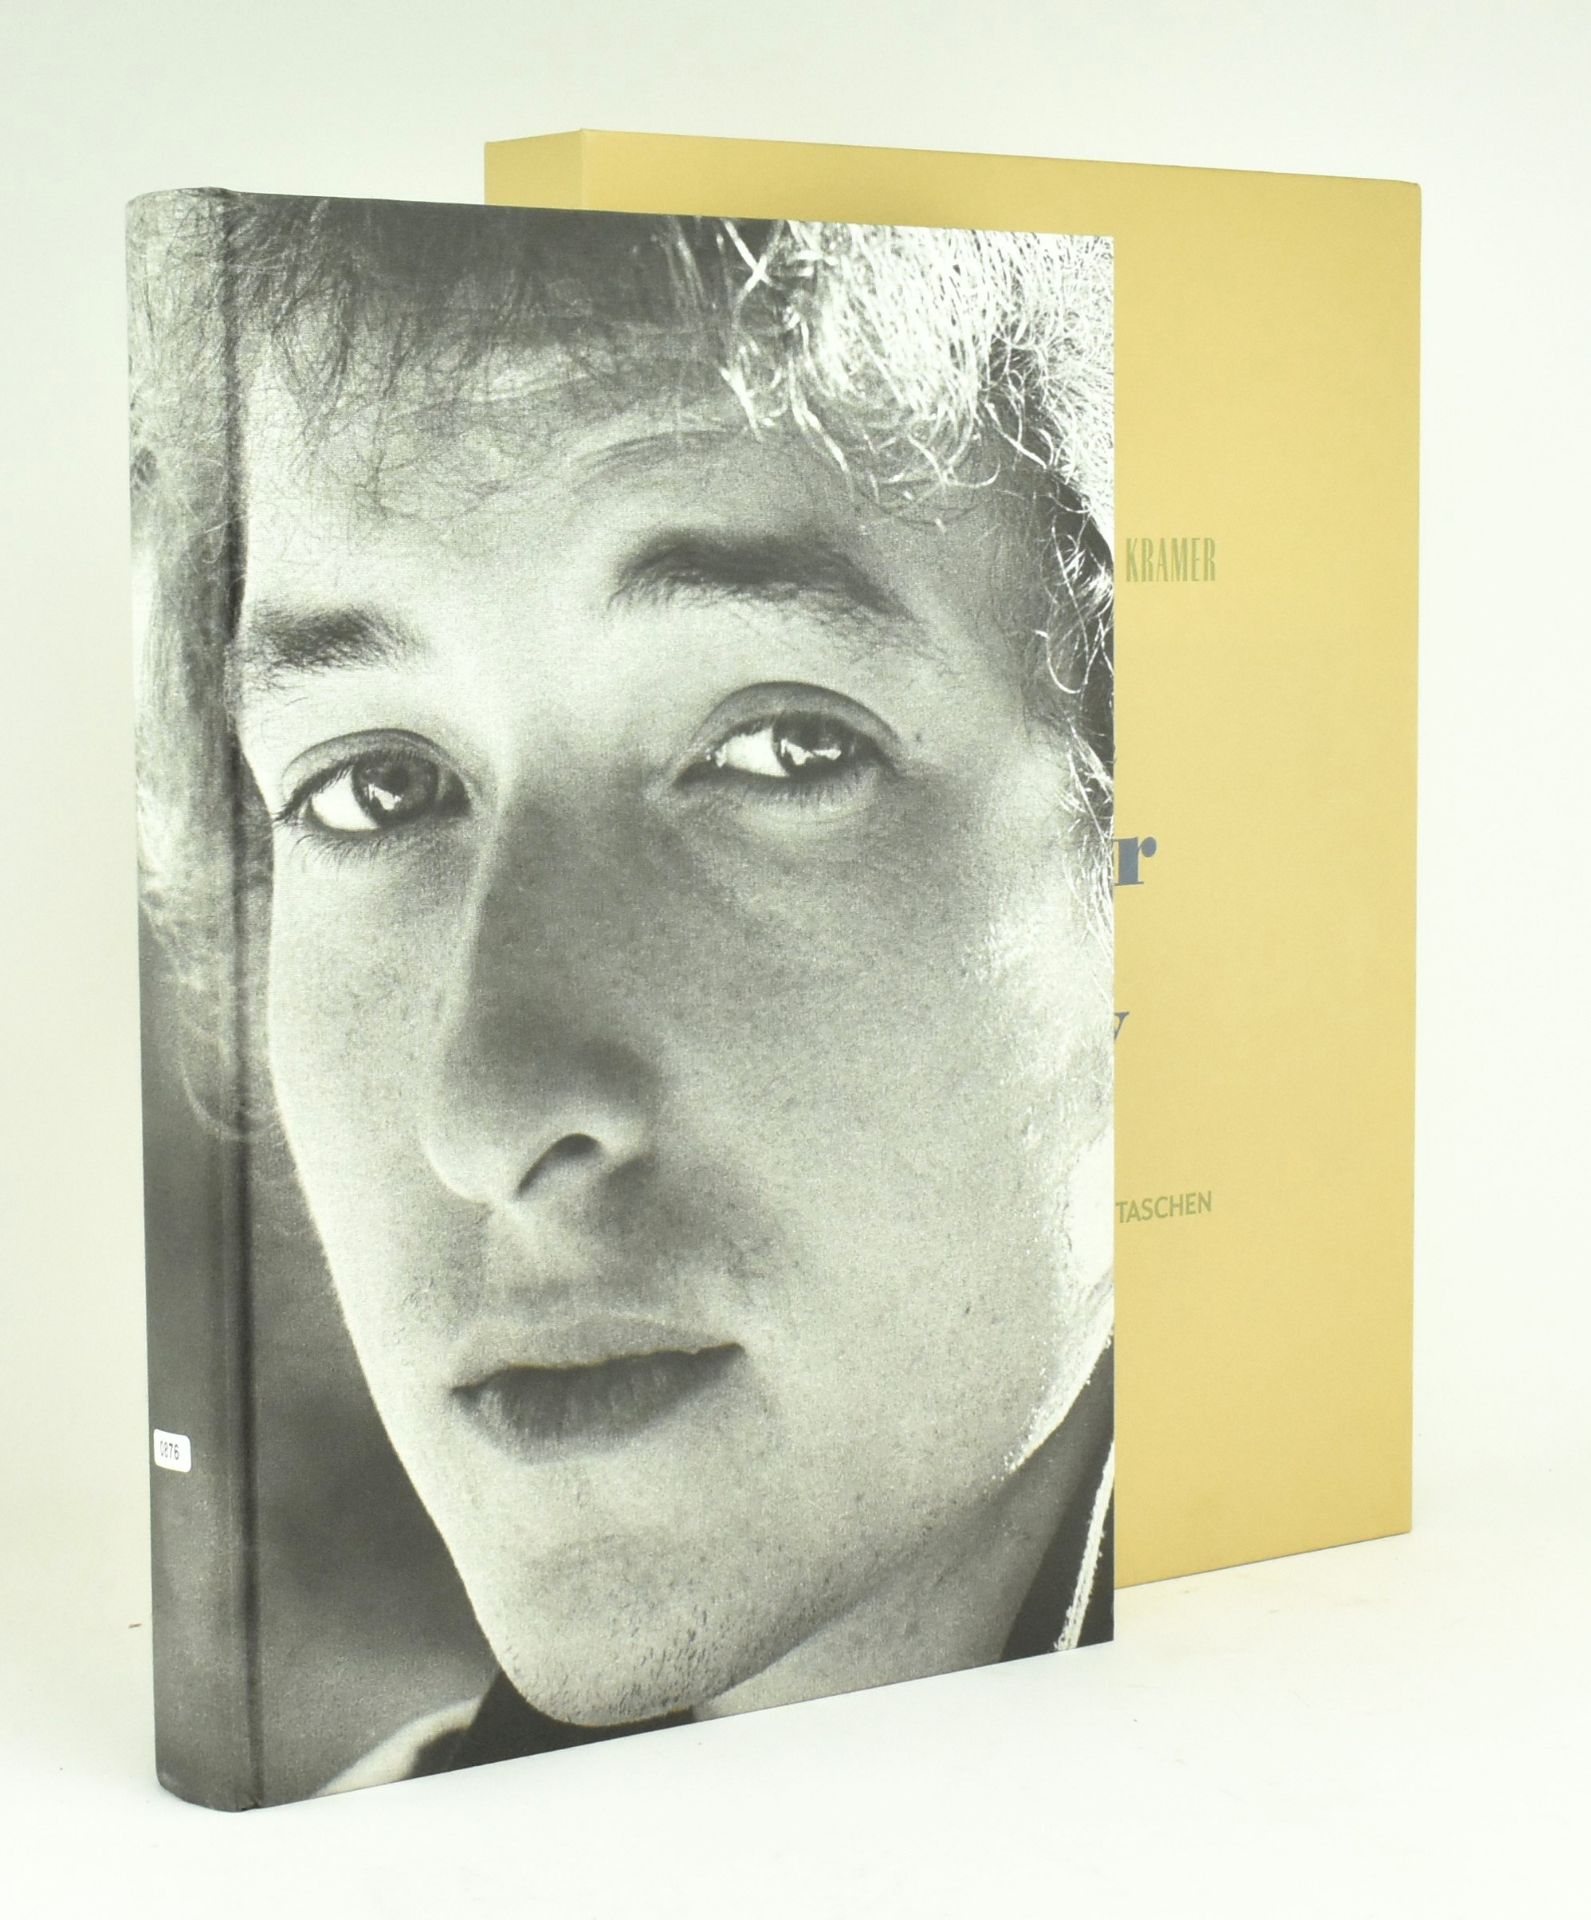 BOB DYLAN A YEAR AND A DAY. SIGNED LIMD EDITION BY DANIEL KRAMER